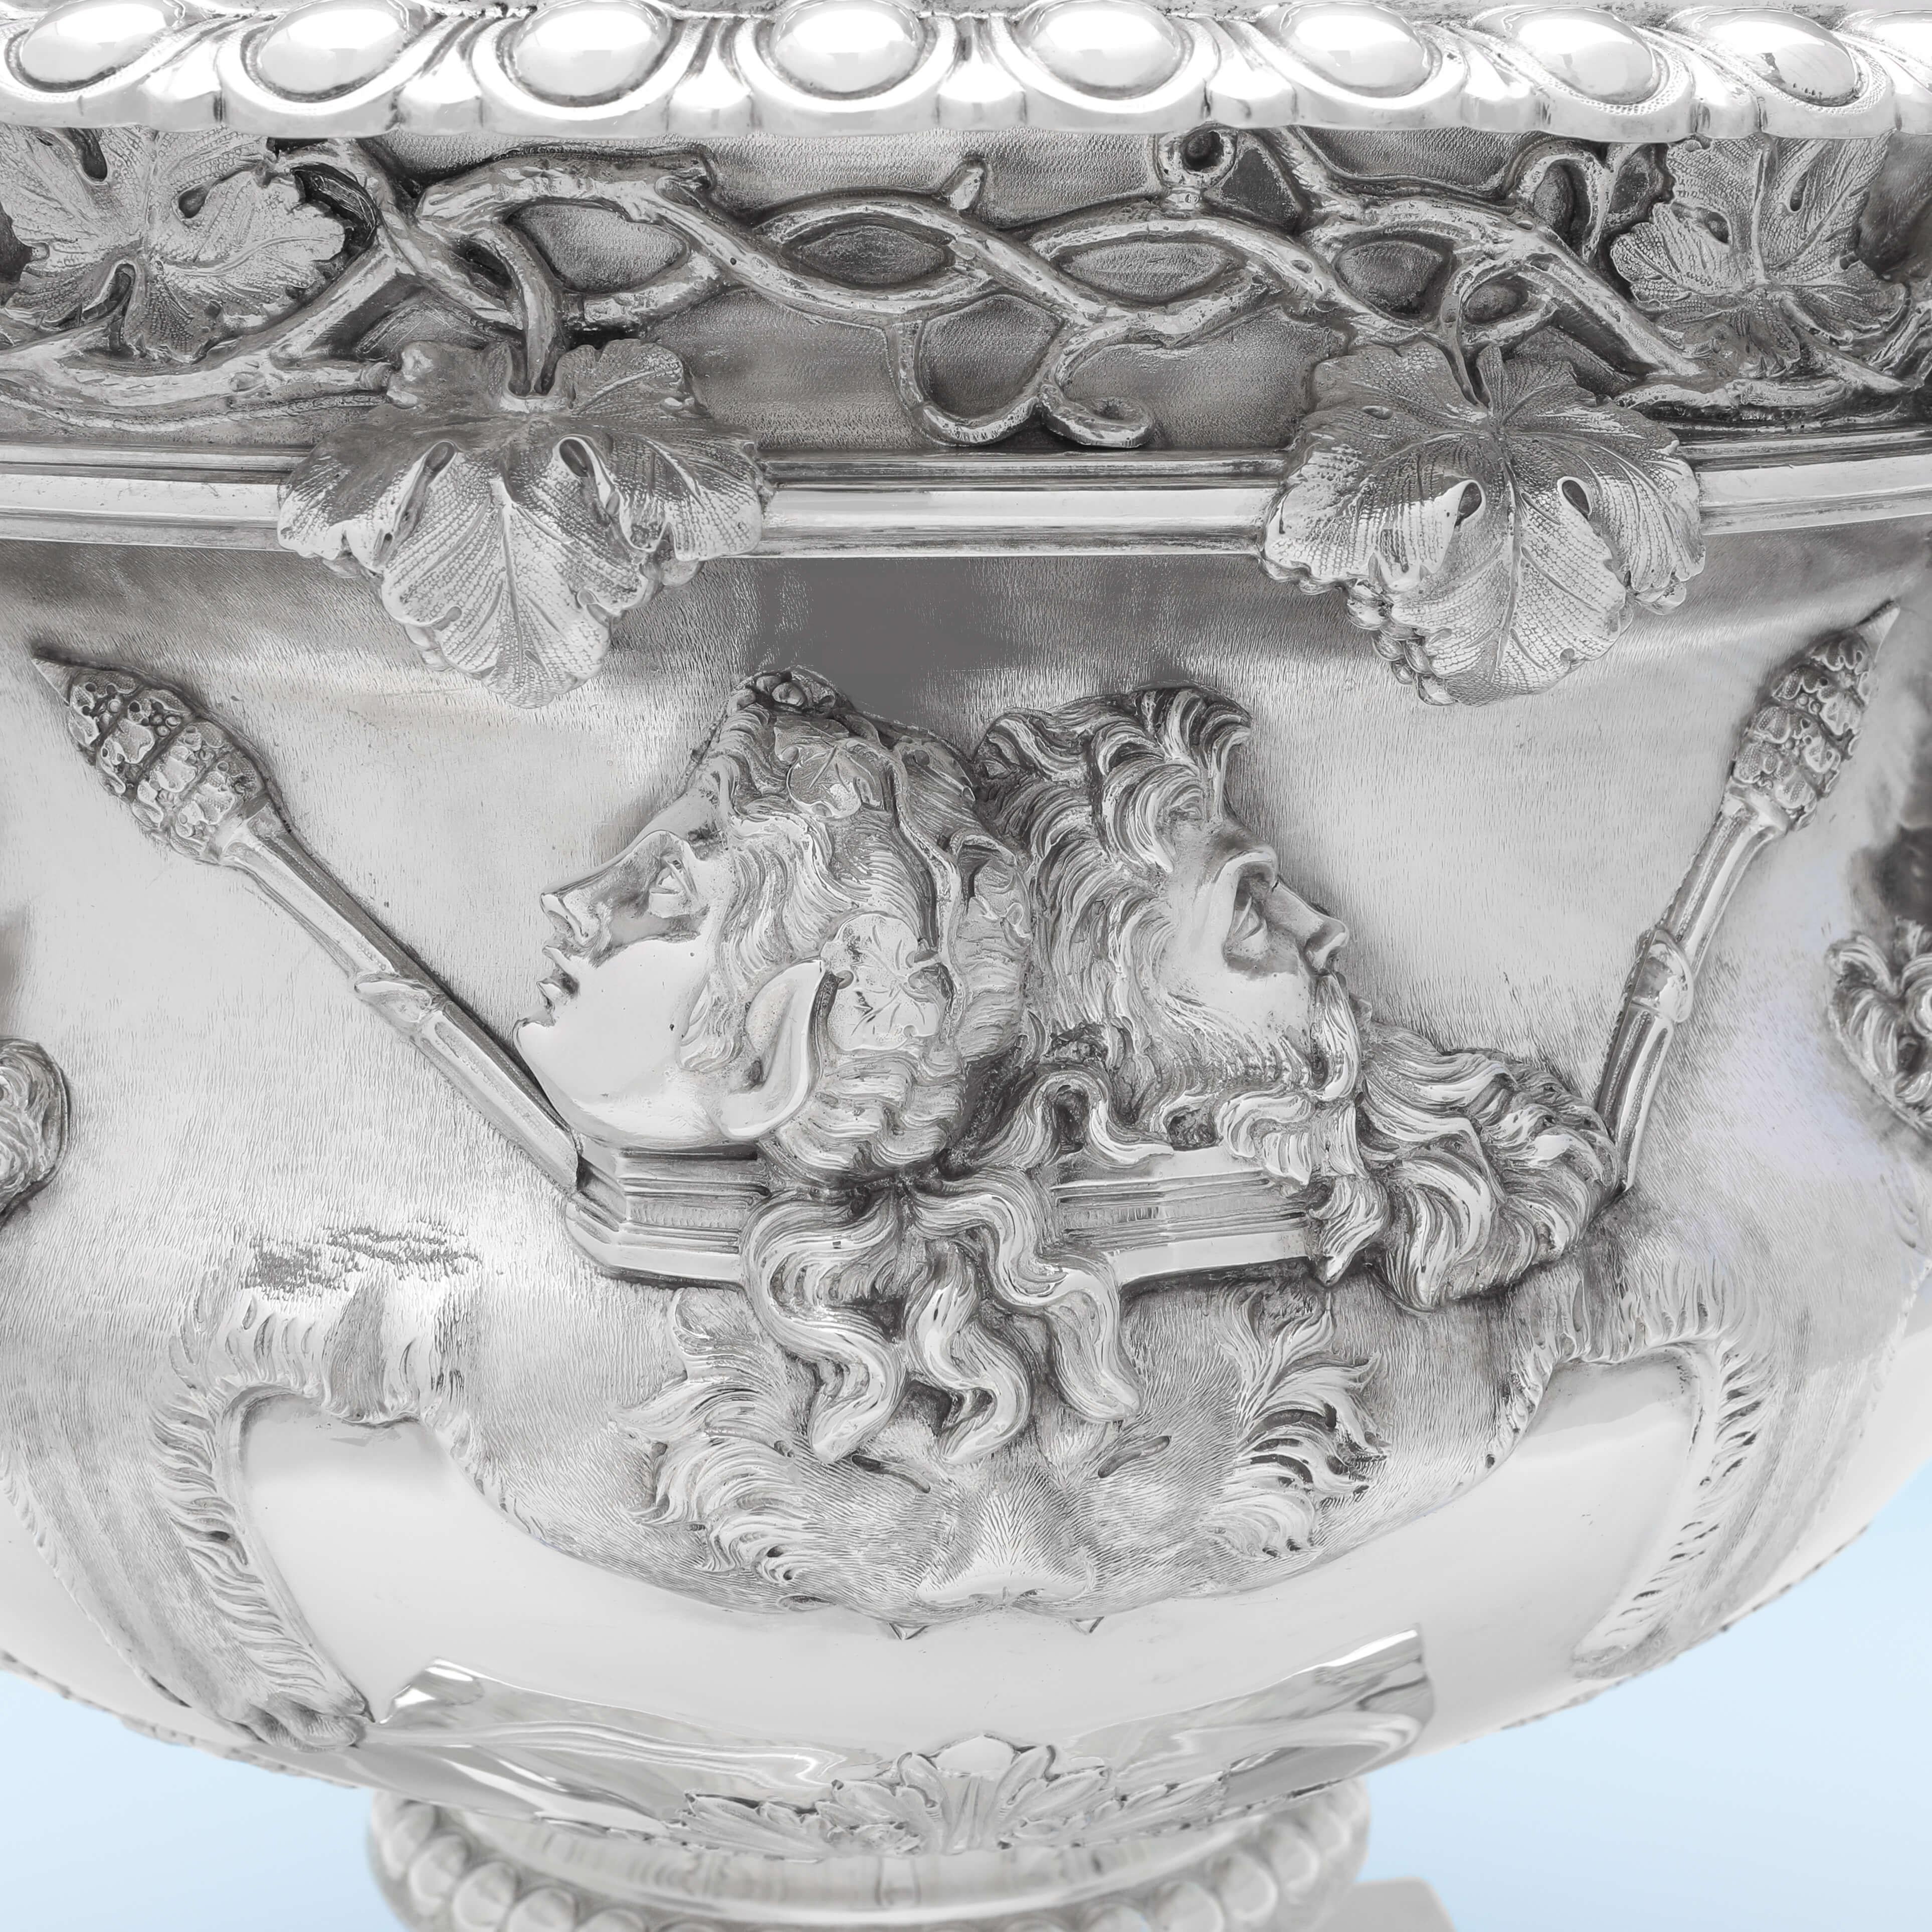 Neoclassical 'The Allenby Cup' a Monumental Sterling Silver Warwick Vase by Barnards, 1906